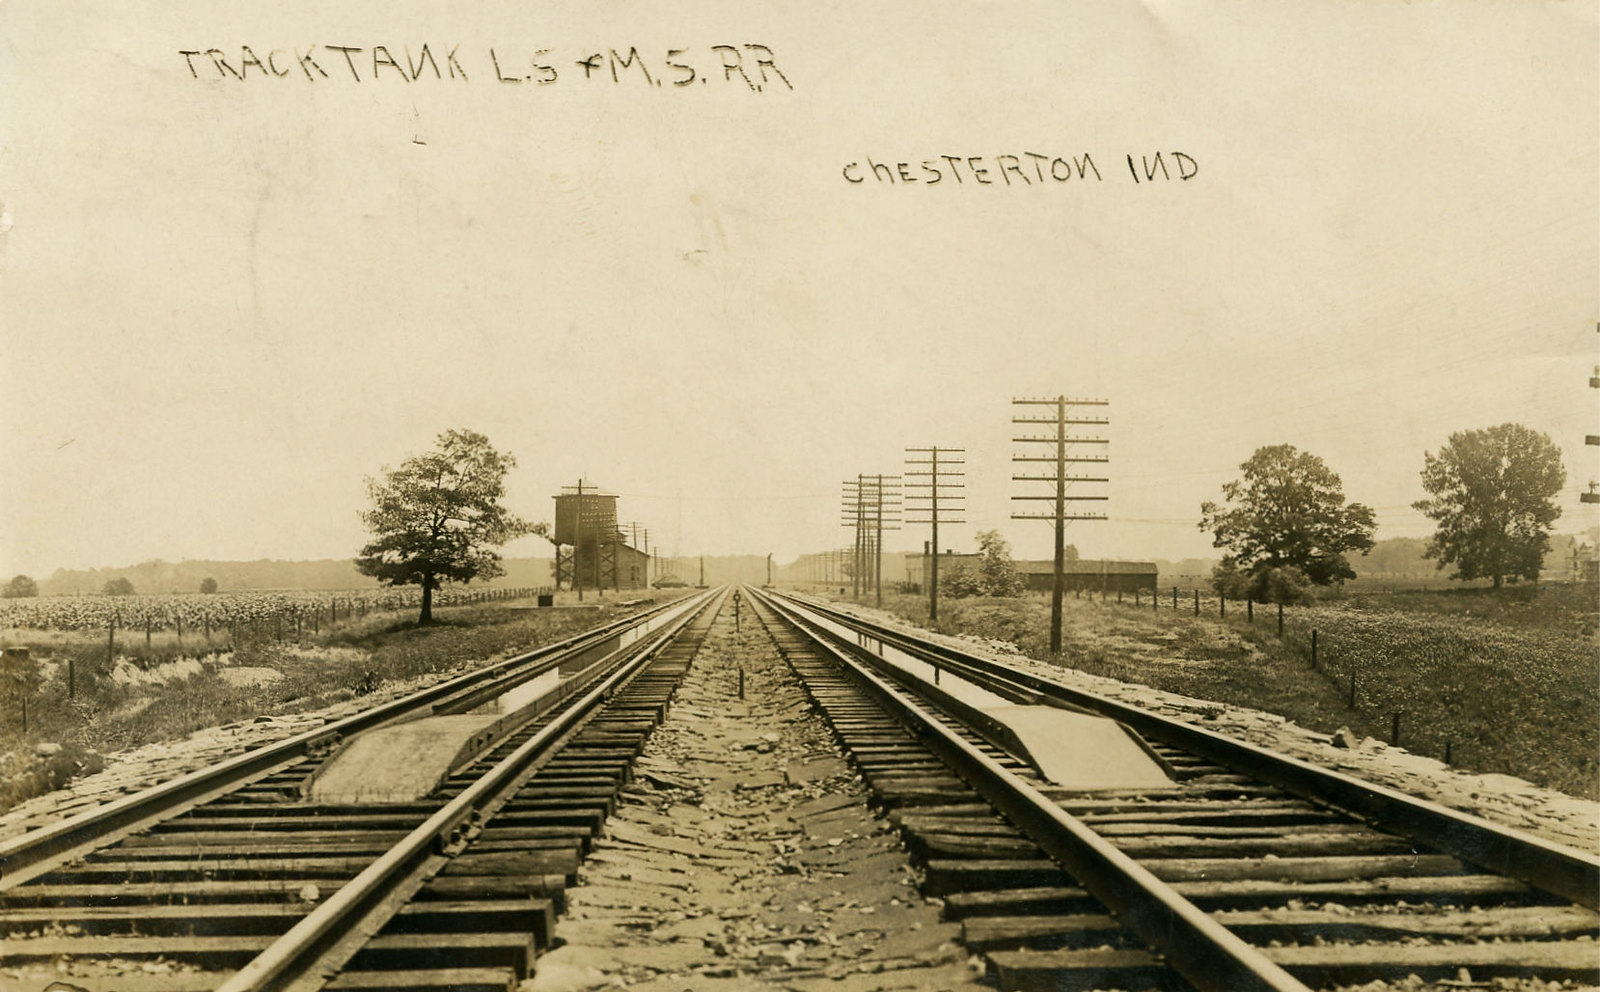 Track Tank on Lake Shore and Michigan Southern Railway, 1908 - Chesterton, Indiana